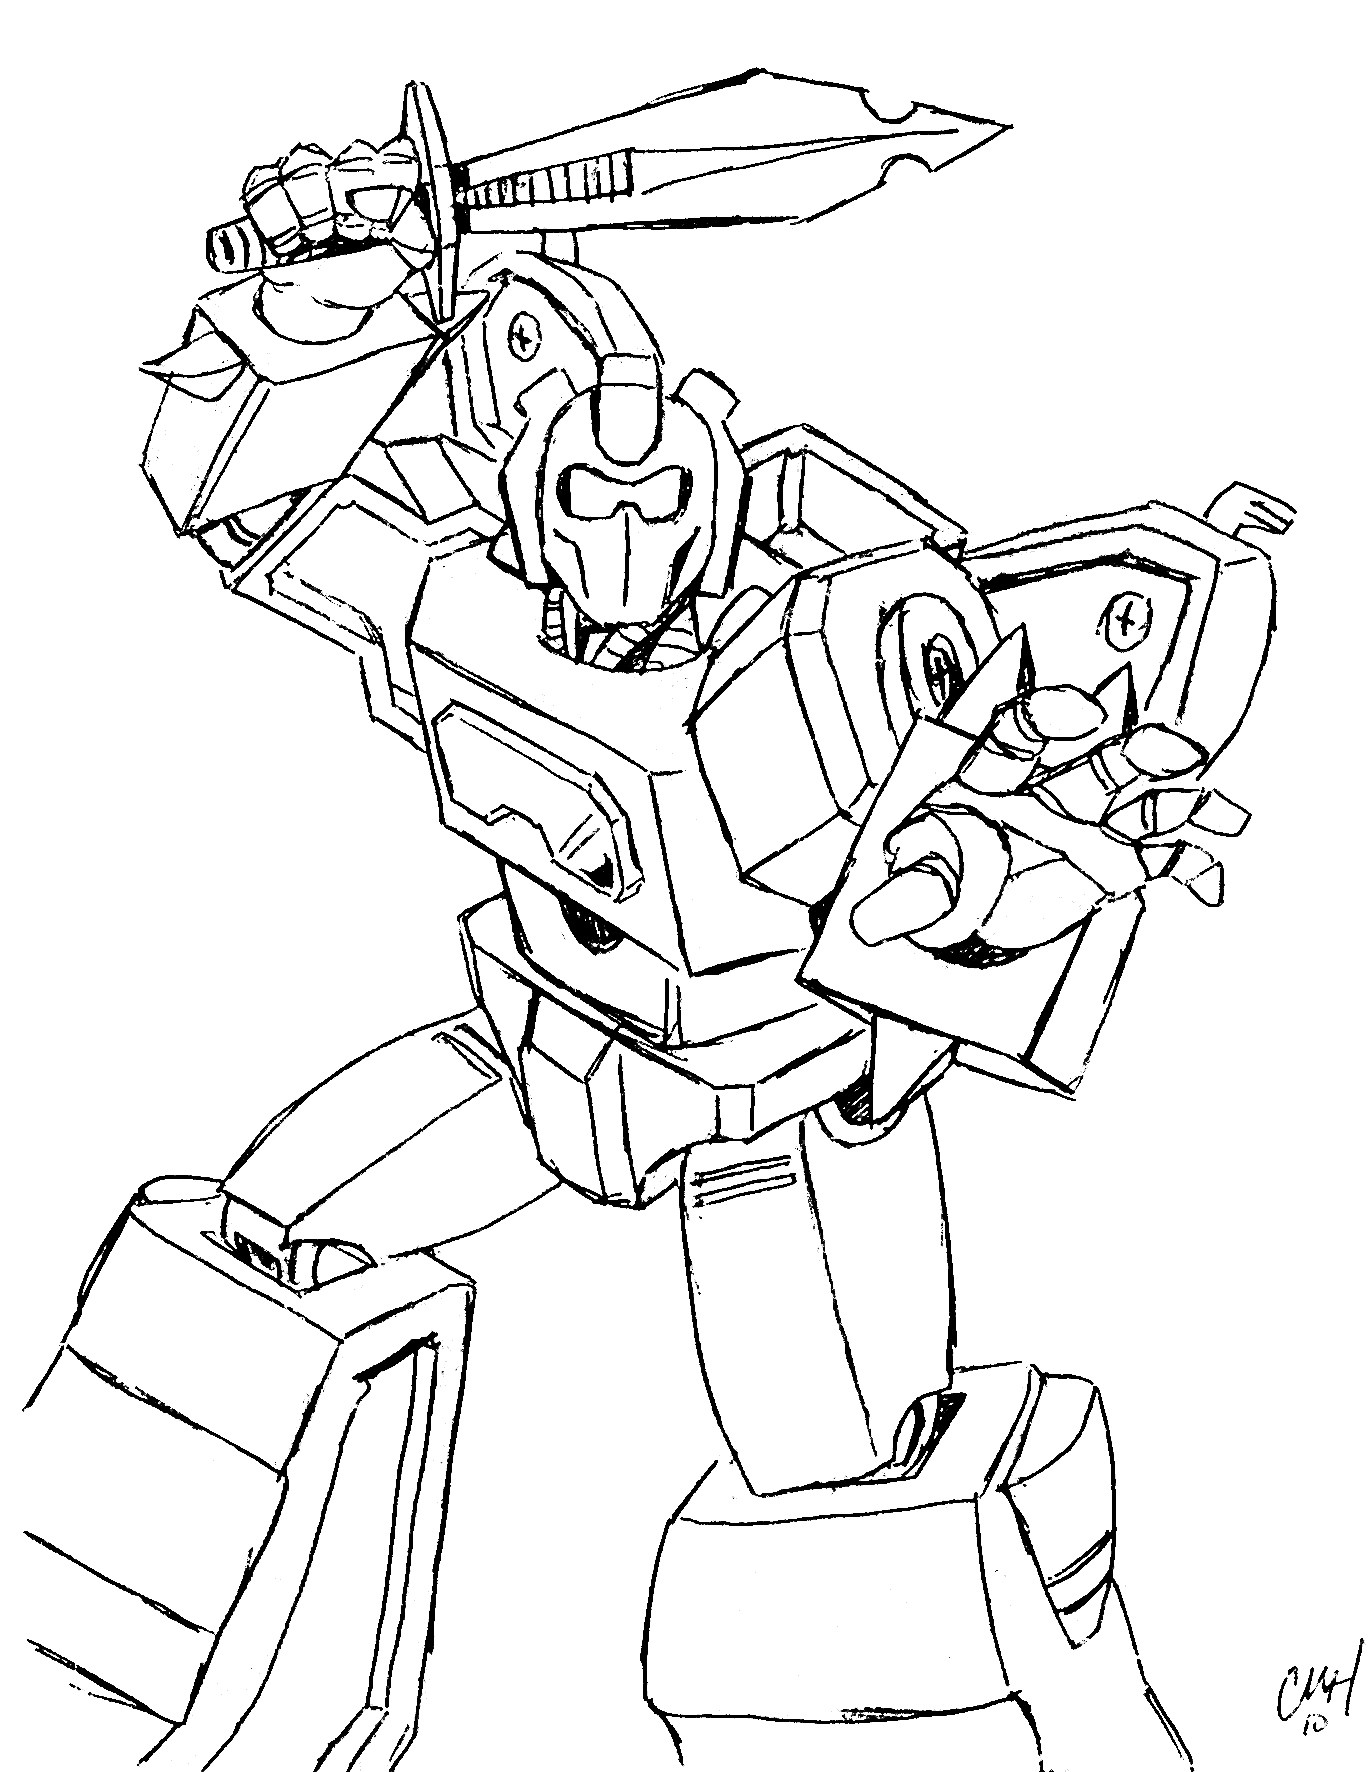 Free Printable Transformers Coloring Pages For Kids Coloring Wallpapers Download Free Images Wallpaper [coloring654.blogspot.com]